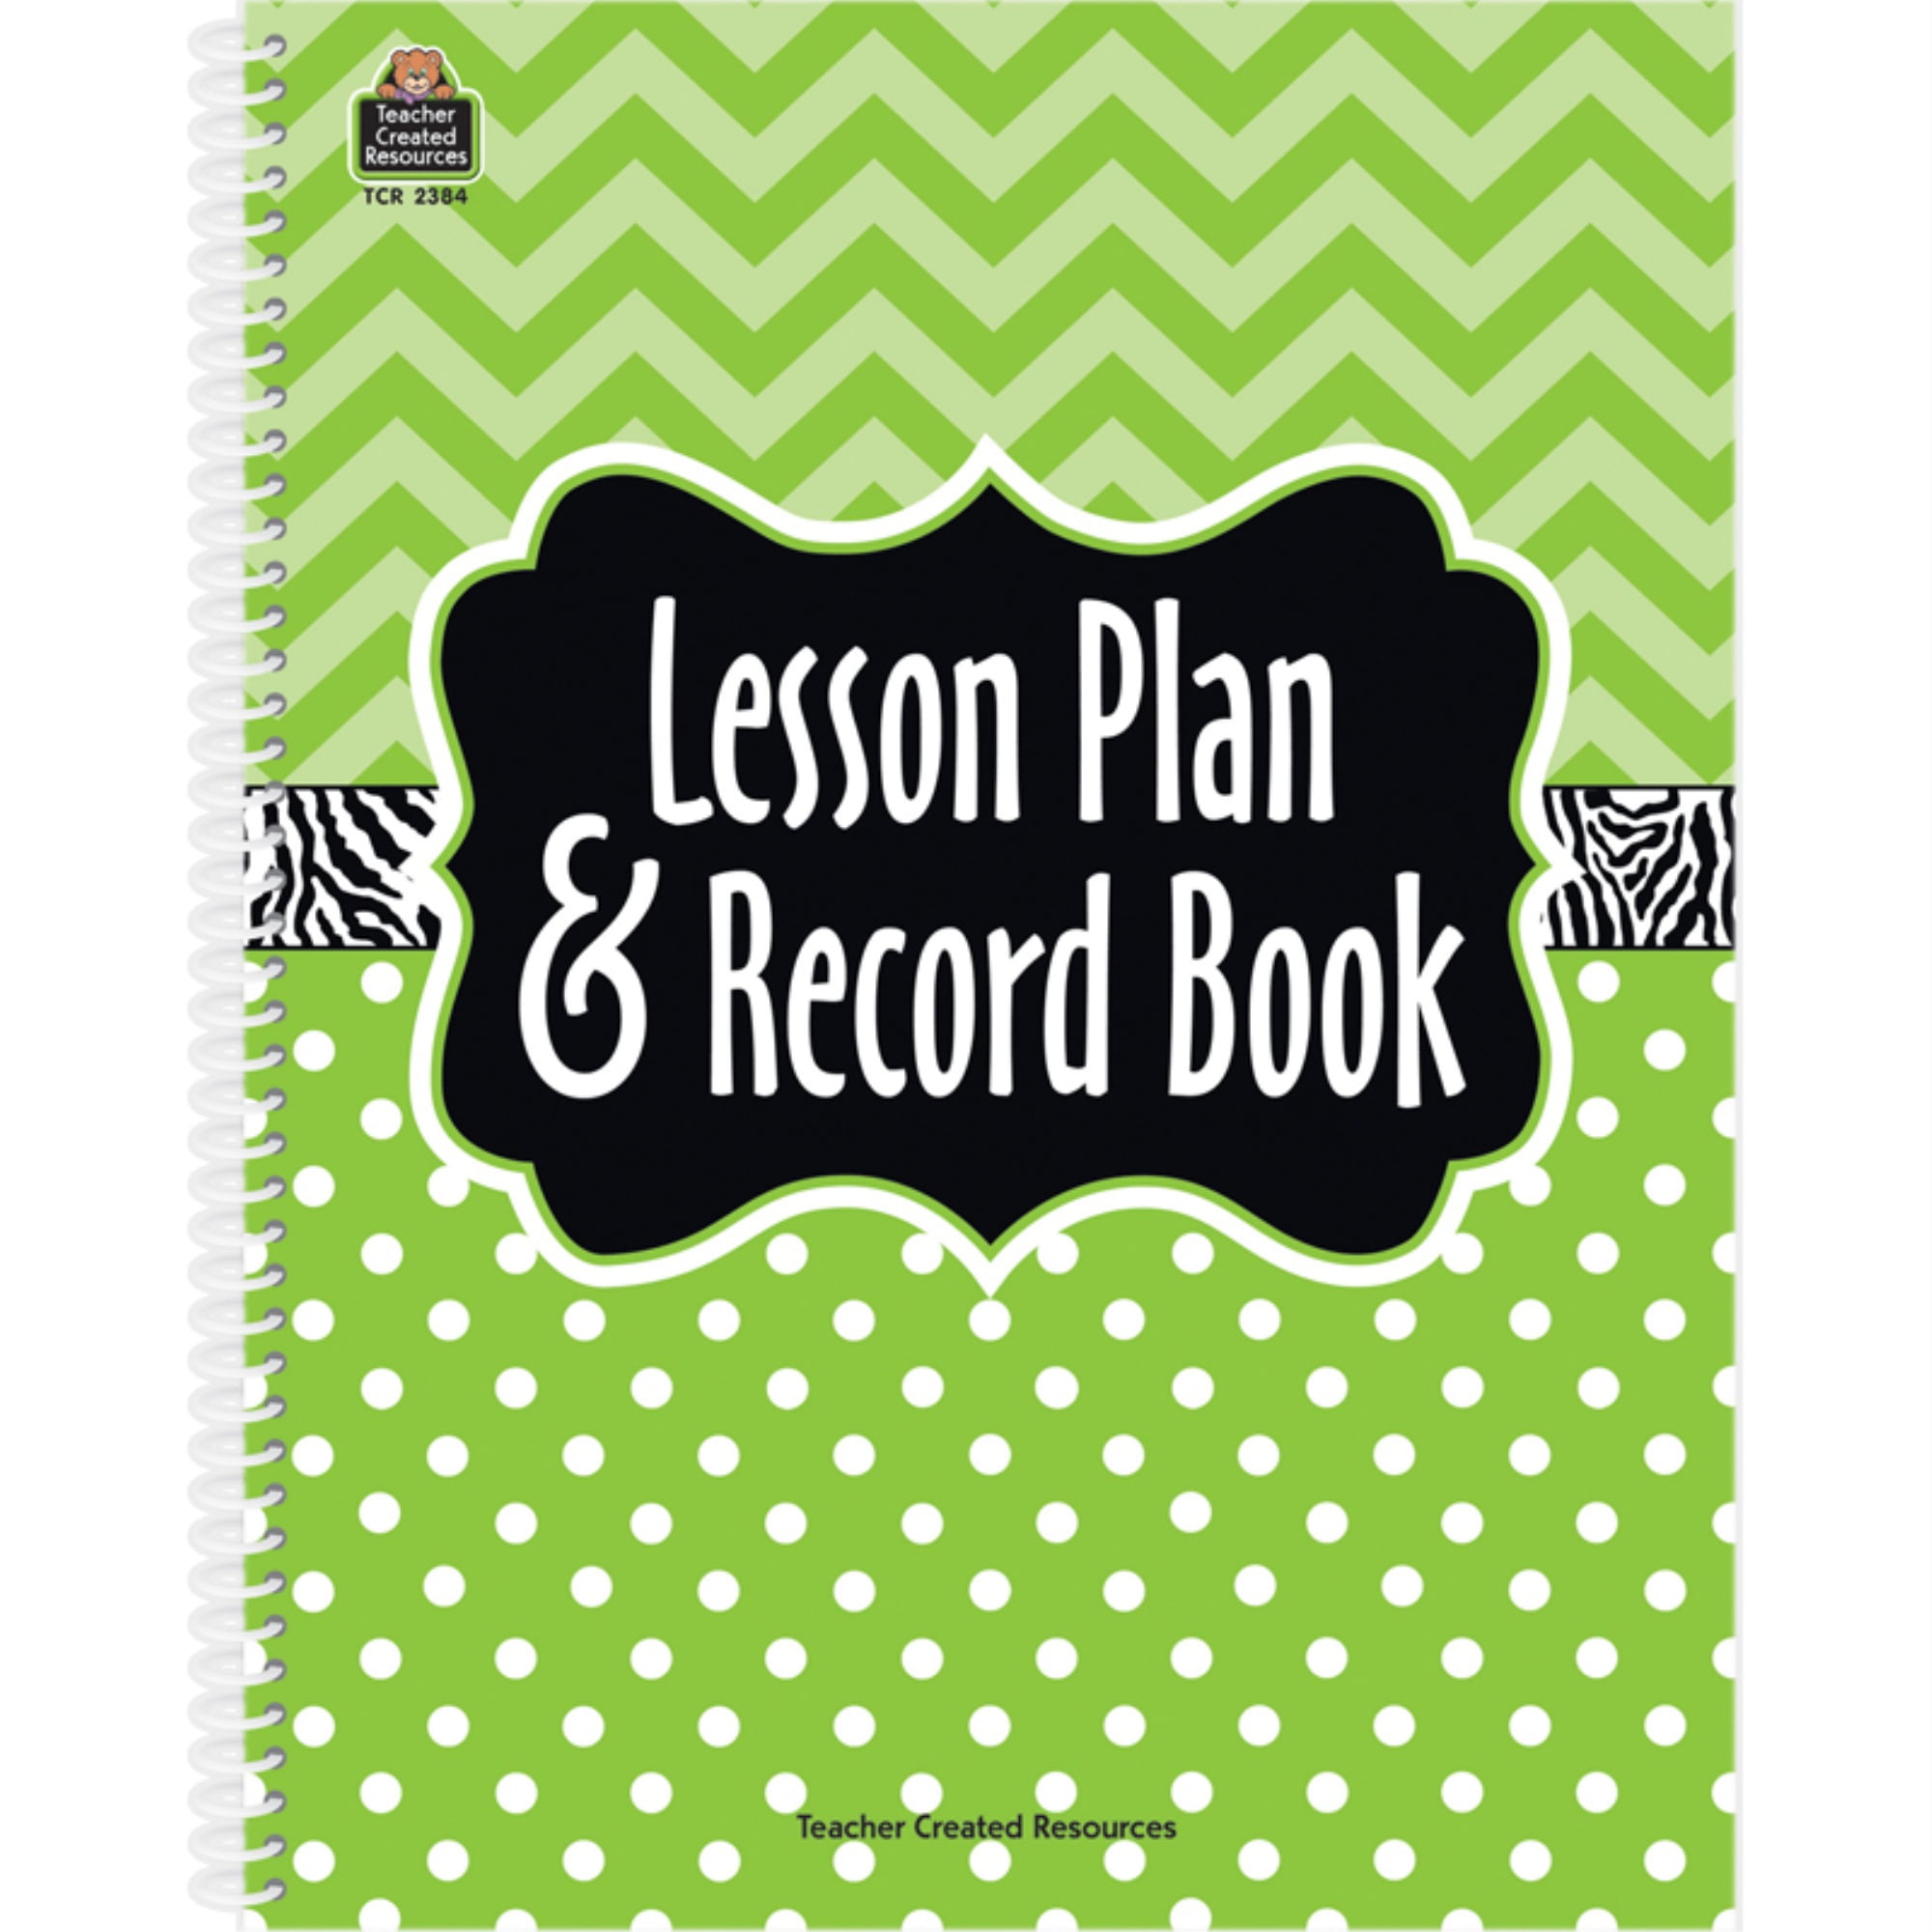 Details about   CD 104797 Colorful Chevron Grade Book Record Book Teaching Supplies 